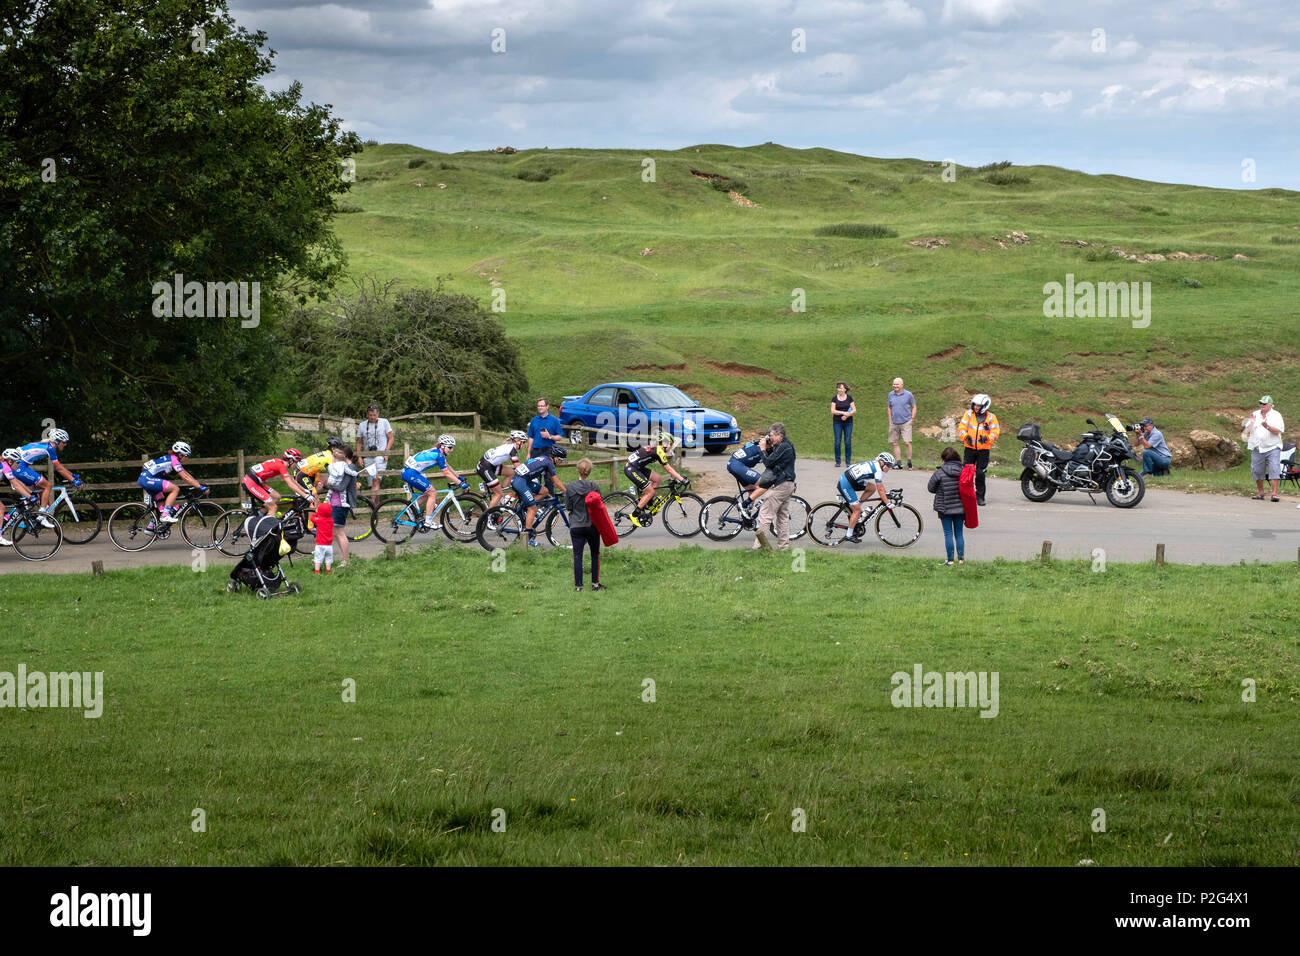 Warwick, UK. 15th June 2018. Lotta Lepisto leads a group on the climb in Burton Dassett Hills on stage 3 of the Ovo energy Womens Cycle Tour. Credit: lovethephoto/Alamy Live News Stock Photo